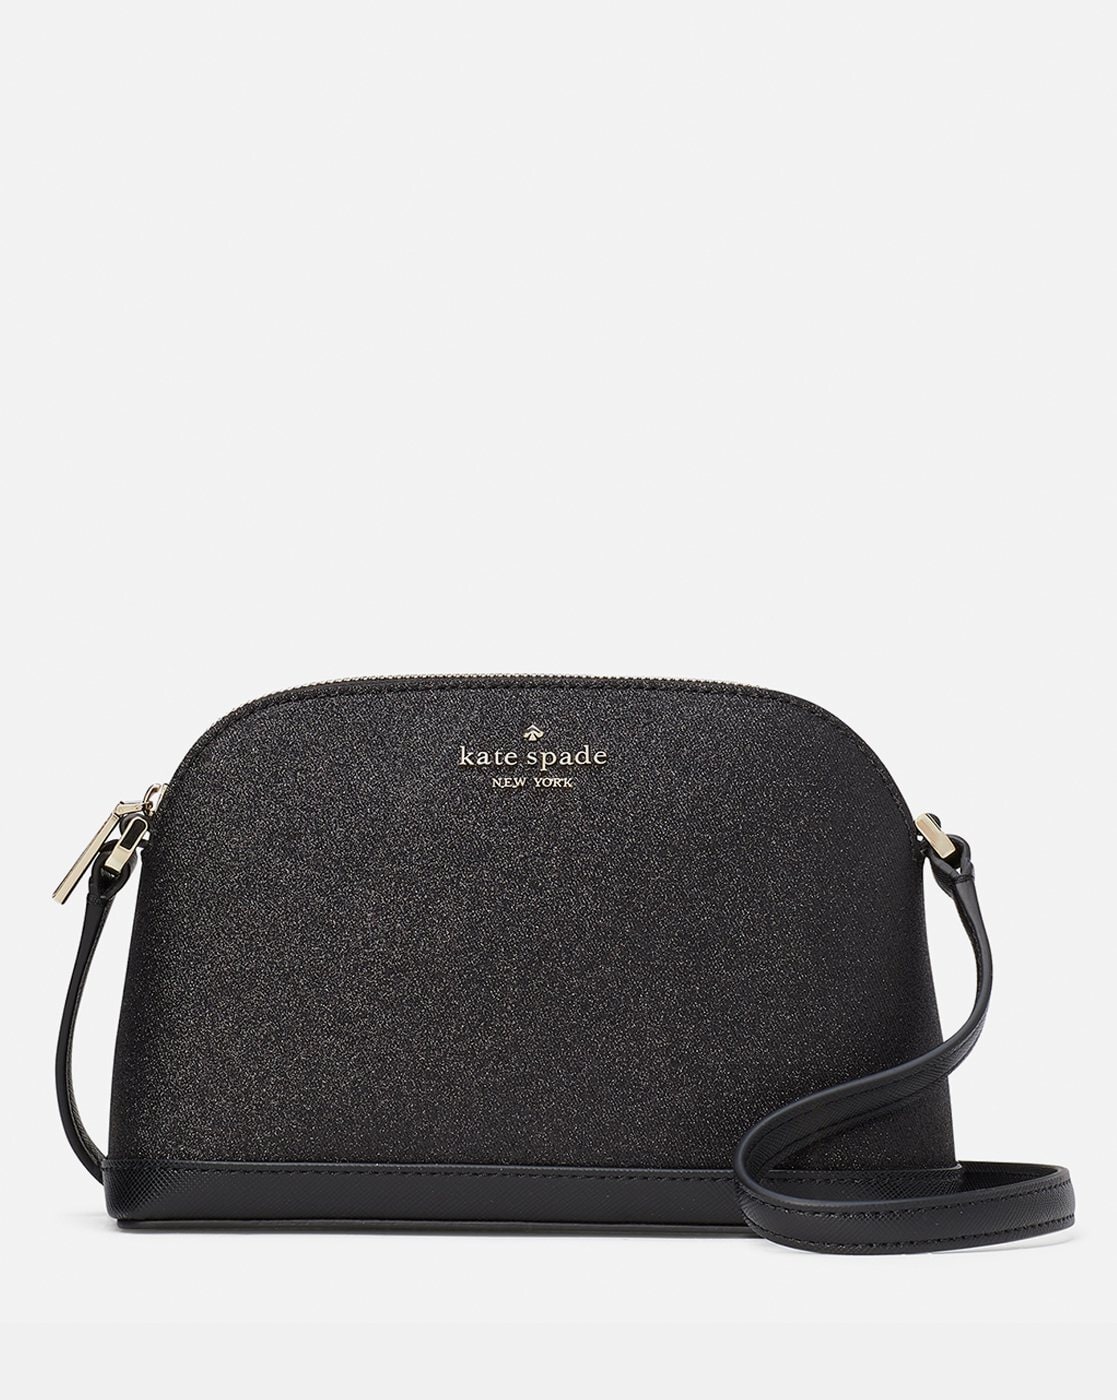 kate spade new york Spencer Saffiano Leather Crossbody Phone Case |  Bloomingdale's